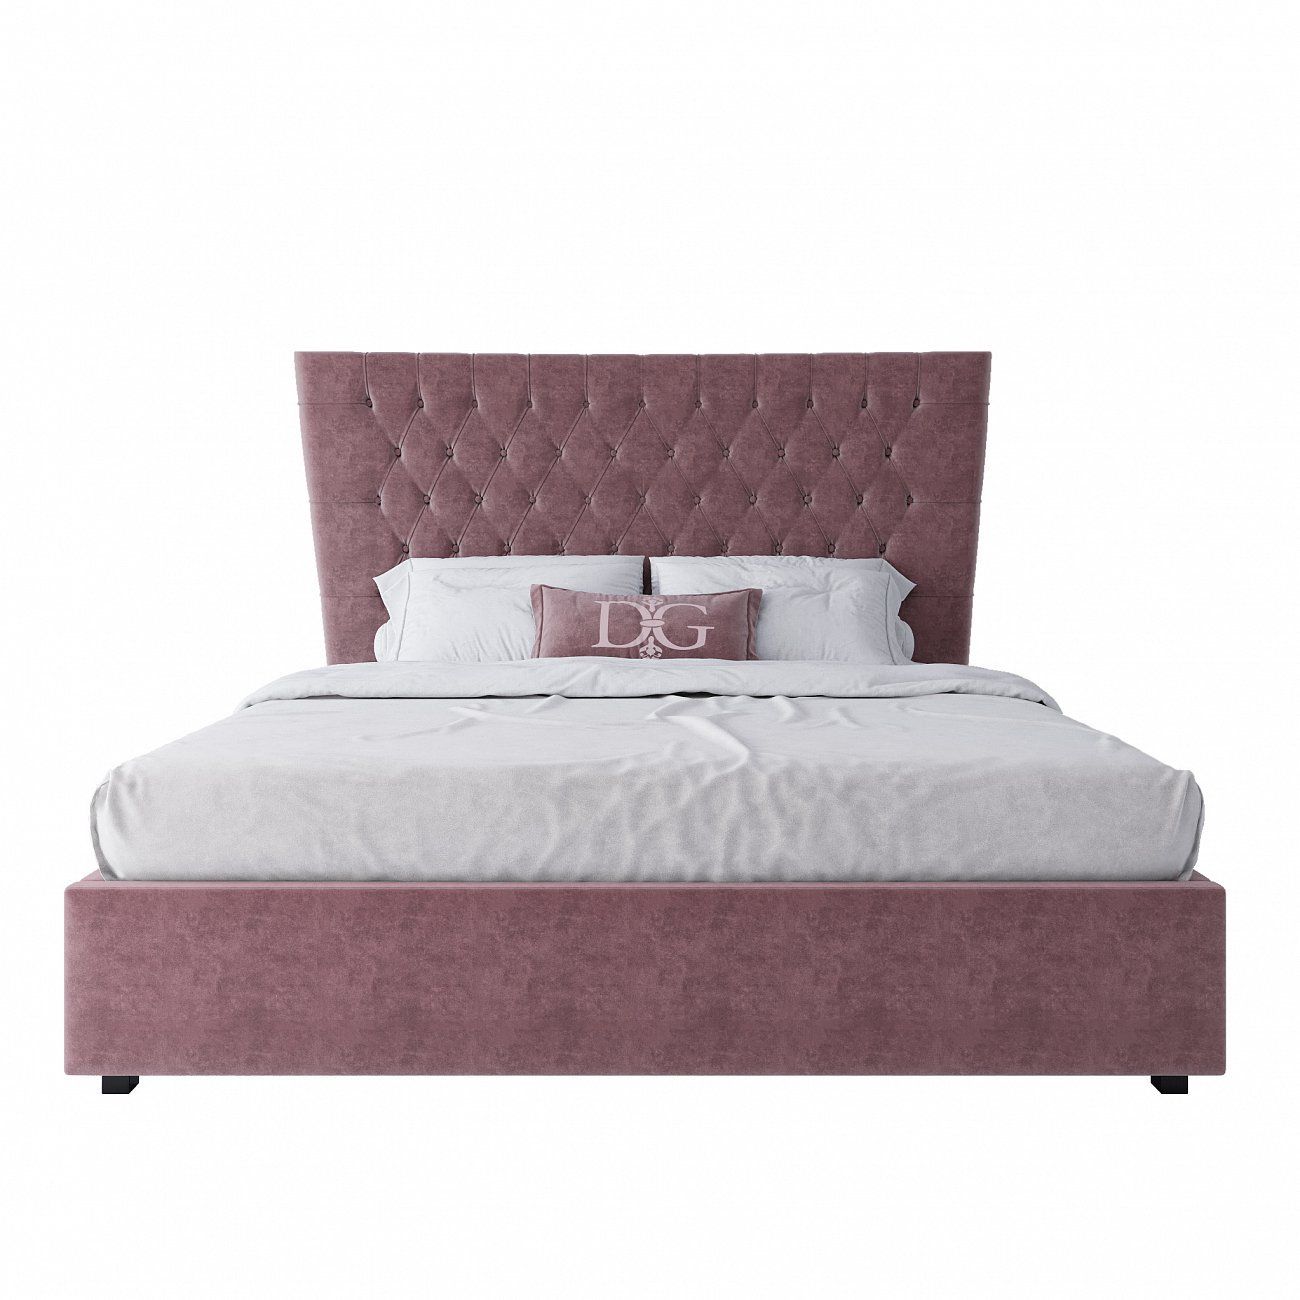 Double bed with upholstered headboard 180x200 cm dusty rose QuickSand